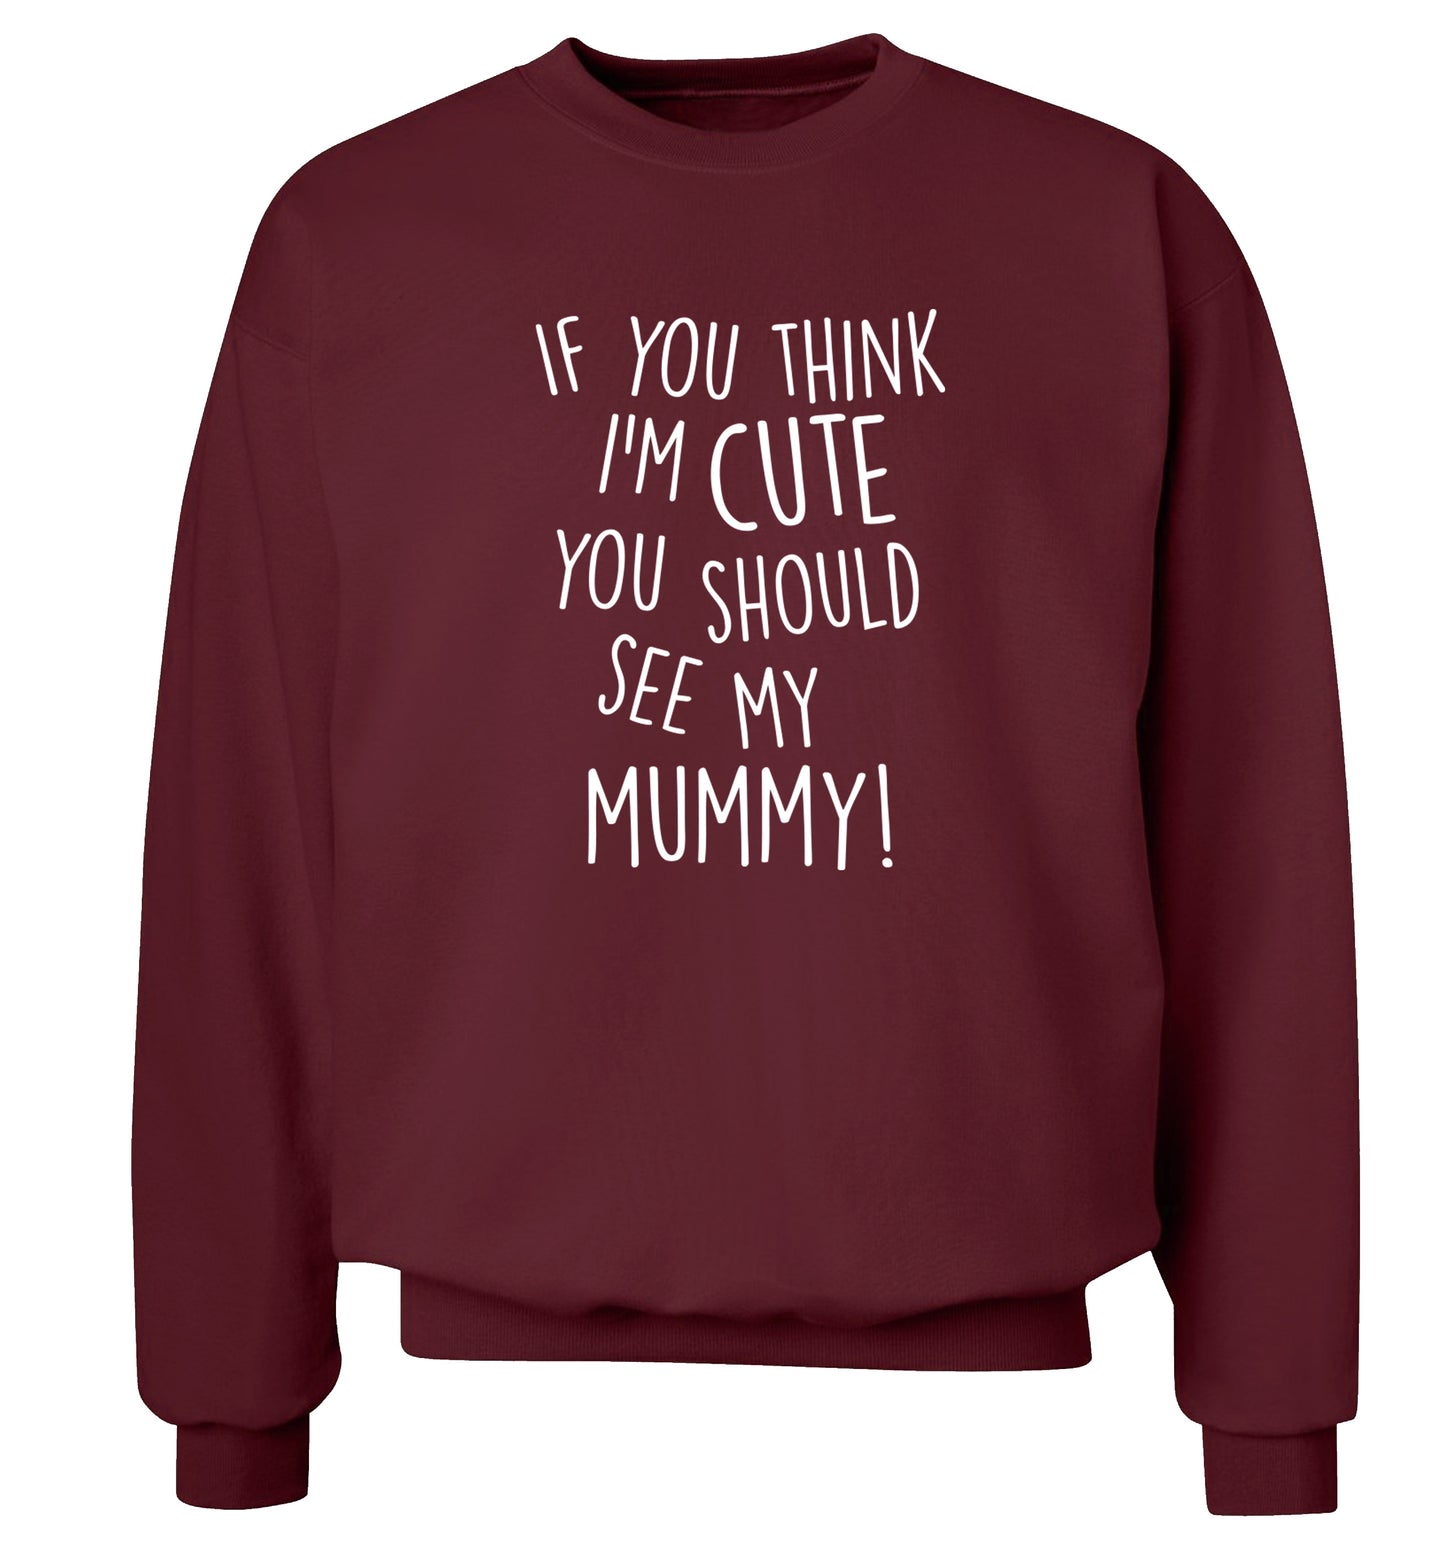 If you think I'm cute you should see my mummy Adult's unisex maroon Sweater 2XL